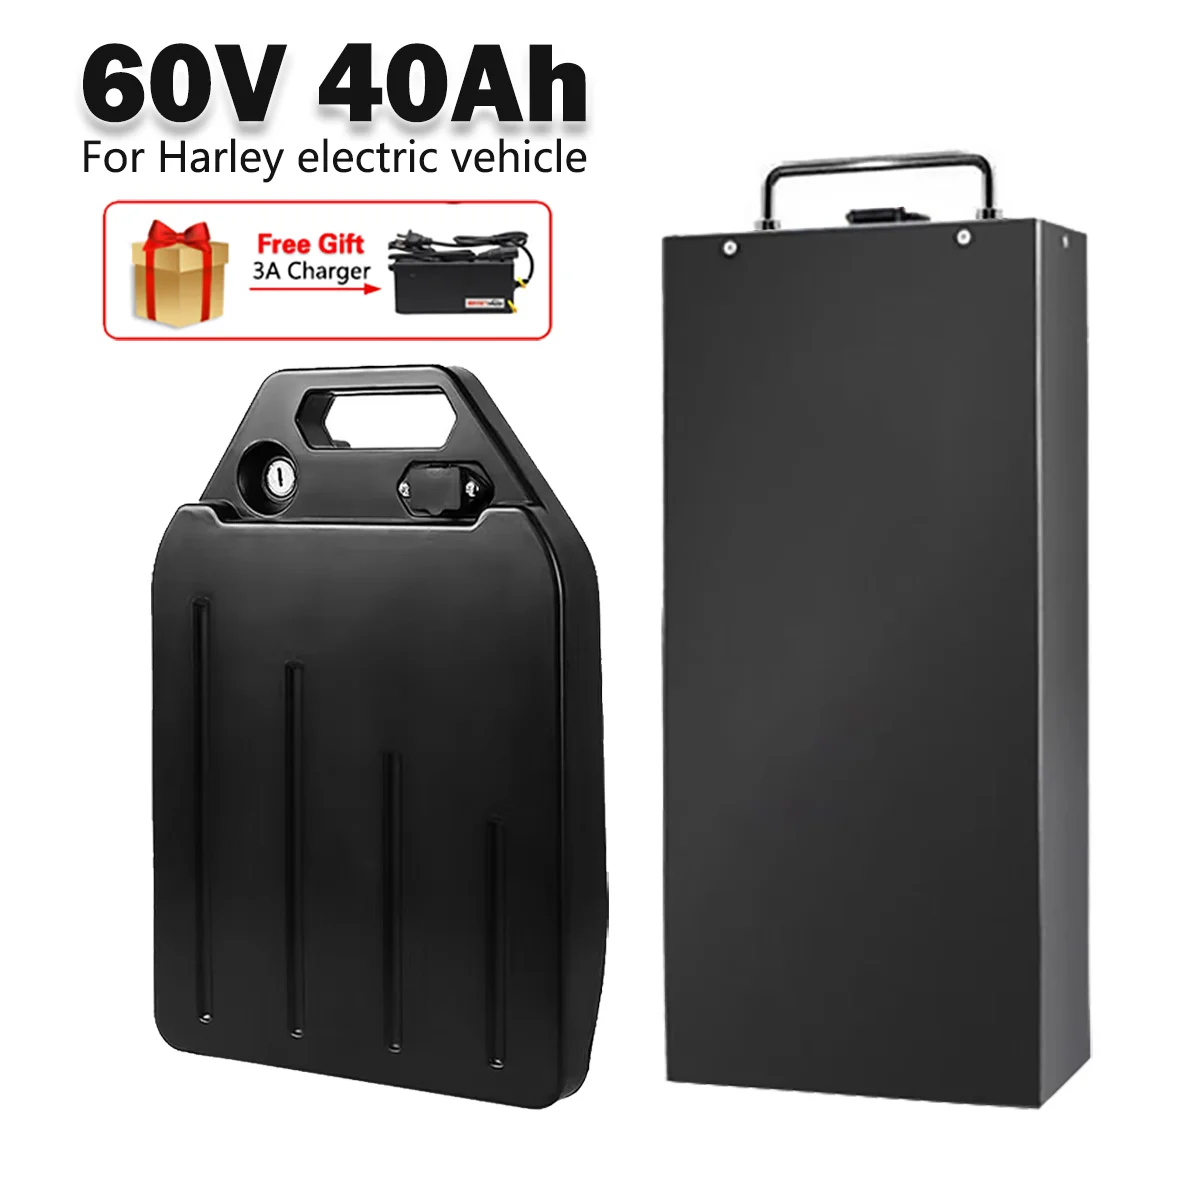 

60V 40Ah 16S 18650 Battery of Harley Electric Scooter It Can Be Used for Electric Bicycle Scooters Below 1800W EU US Duty Free